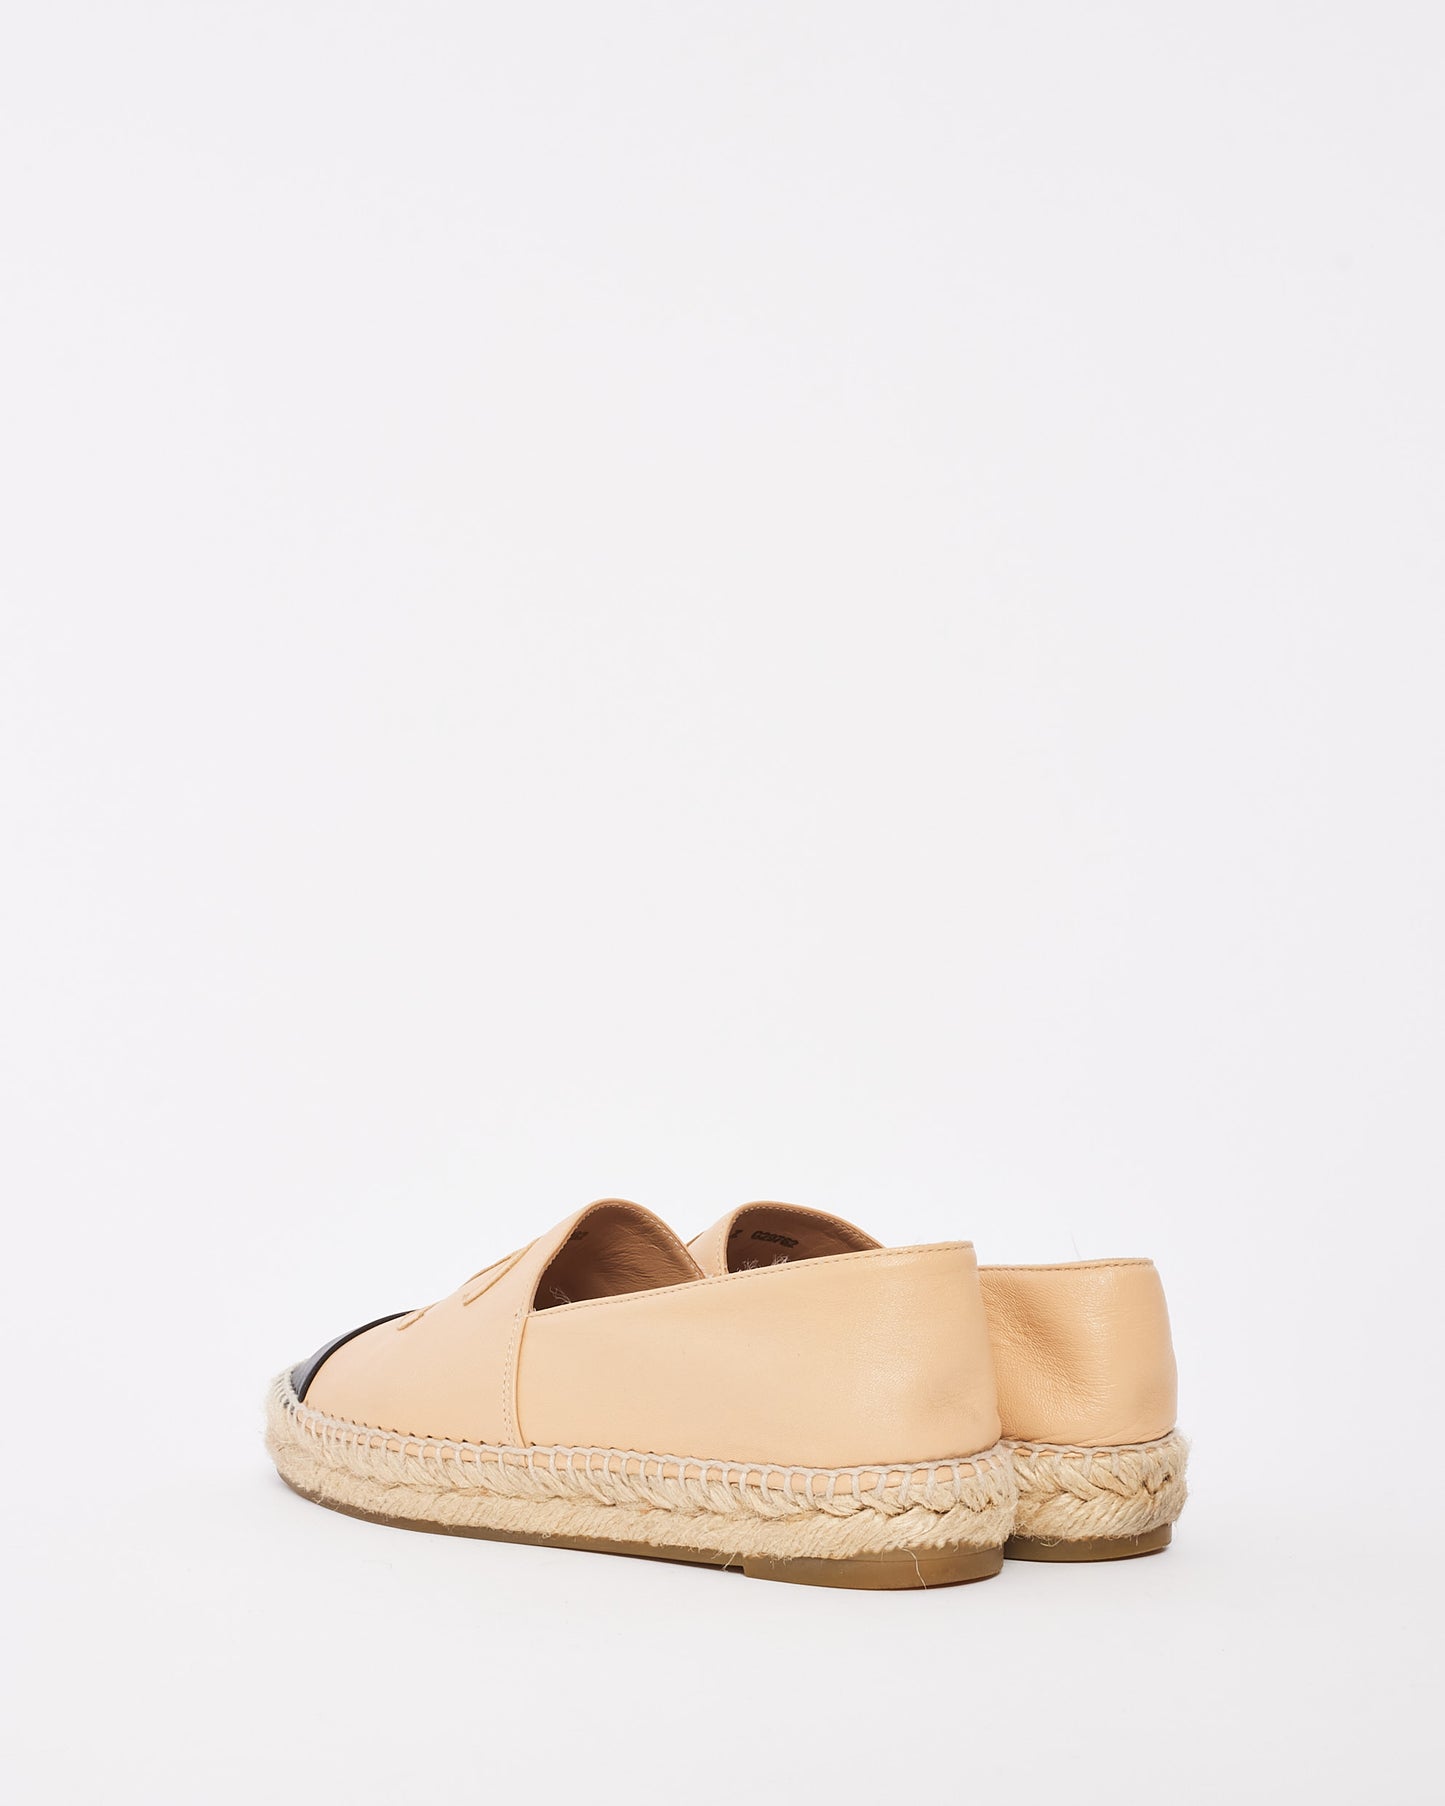 Chanel Beige Leather Espadrille Shoes - 37